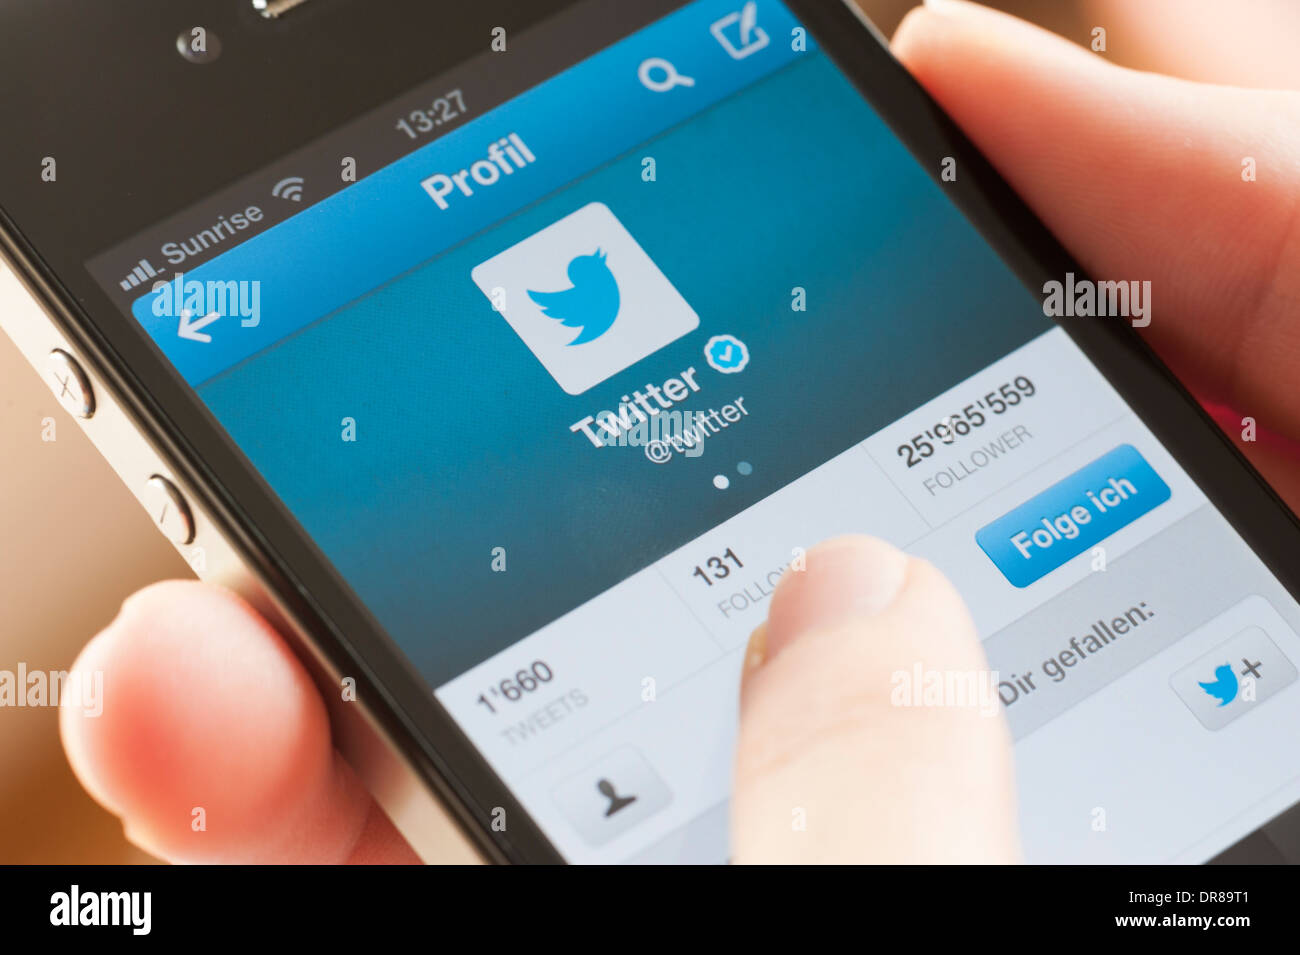 Close-up of a smartphone display showing the profile picture of Twitter's own Twitter account. Stock Photo